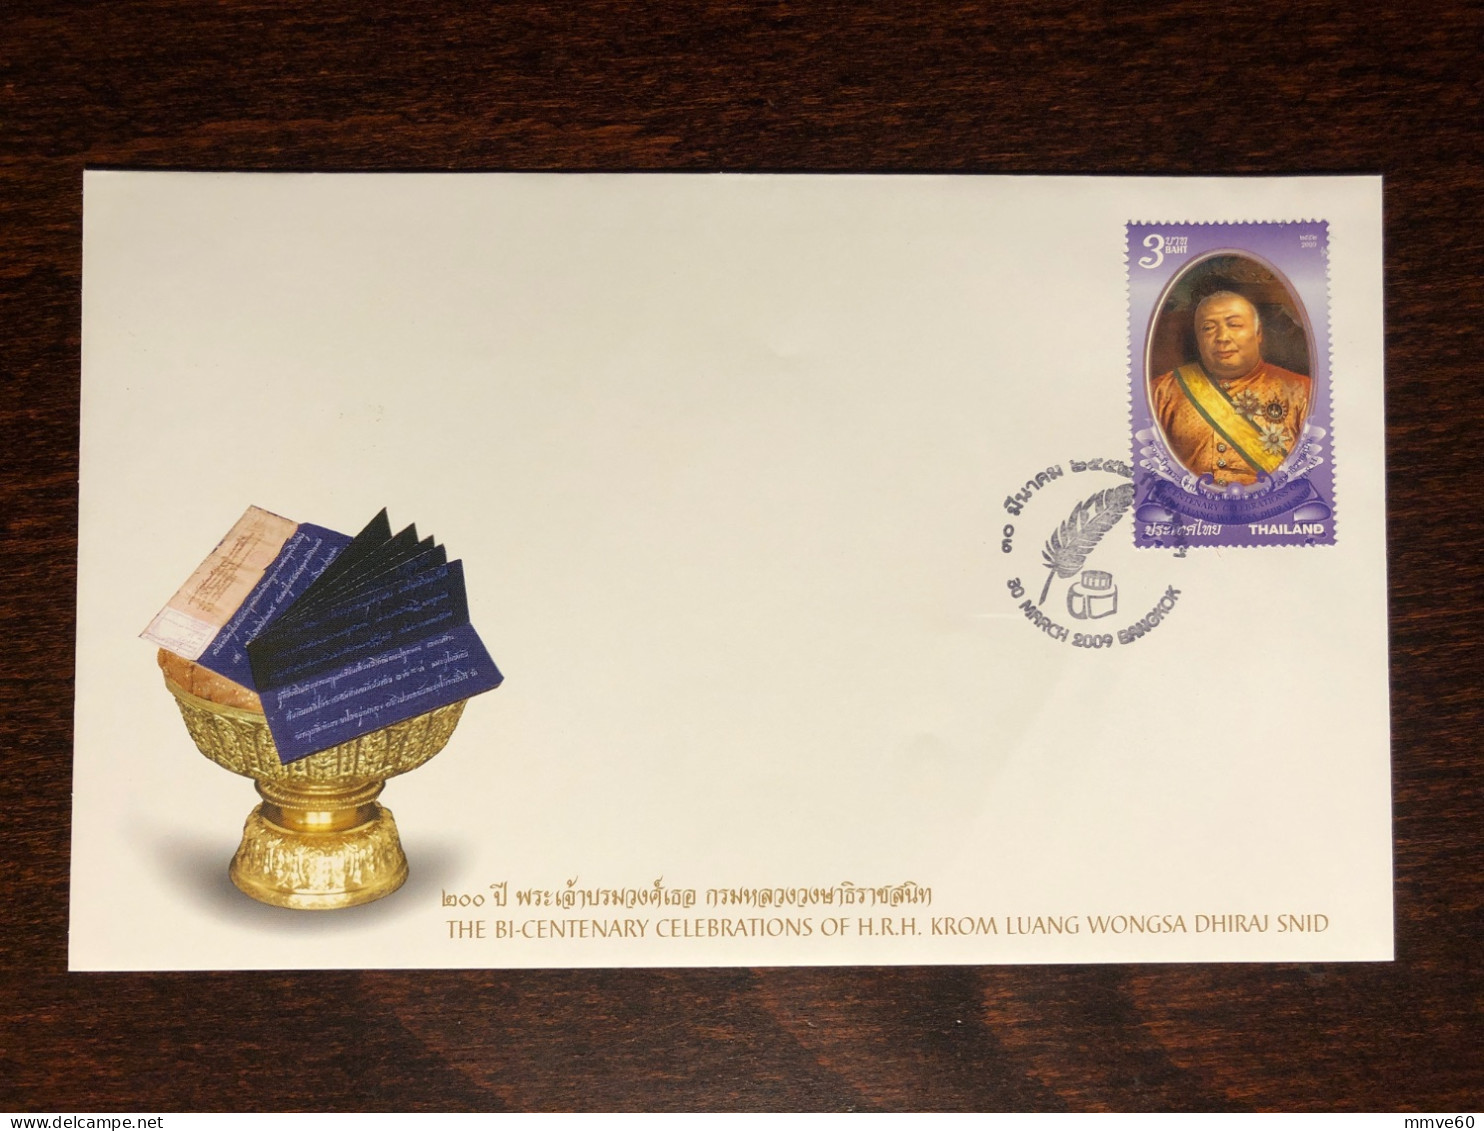 THAILAND FDC COVER 2009 YEAR WRITER POET  STAMPS - Thailand